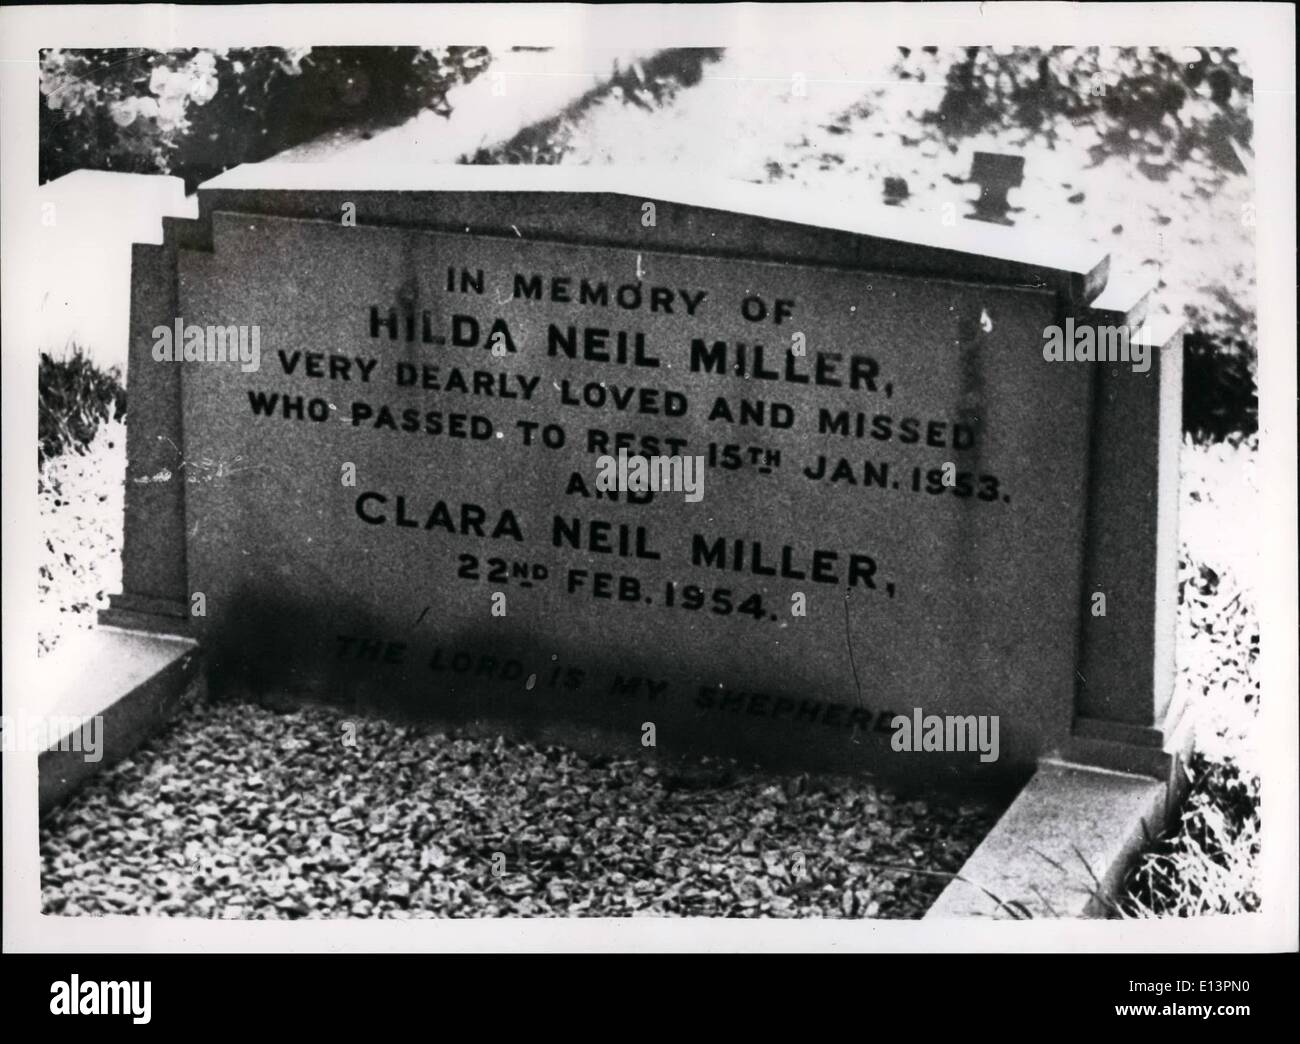 Mar. 22, 2012 - In memory of Hilda Neil Miller, very dearly loved and missed who passed to rest 15th Jan. 1953. and Clara Neil Miller 22nd Feb. 1954. Stock Photo